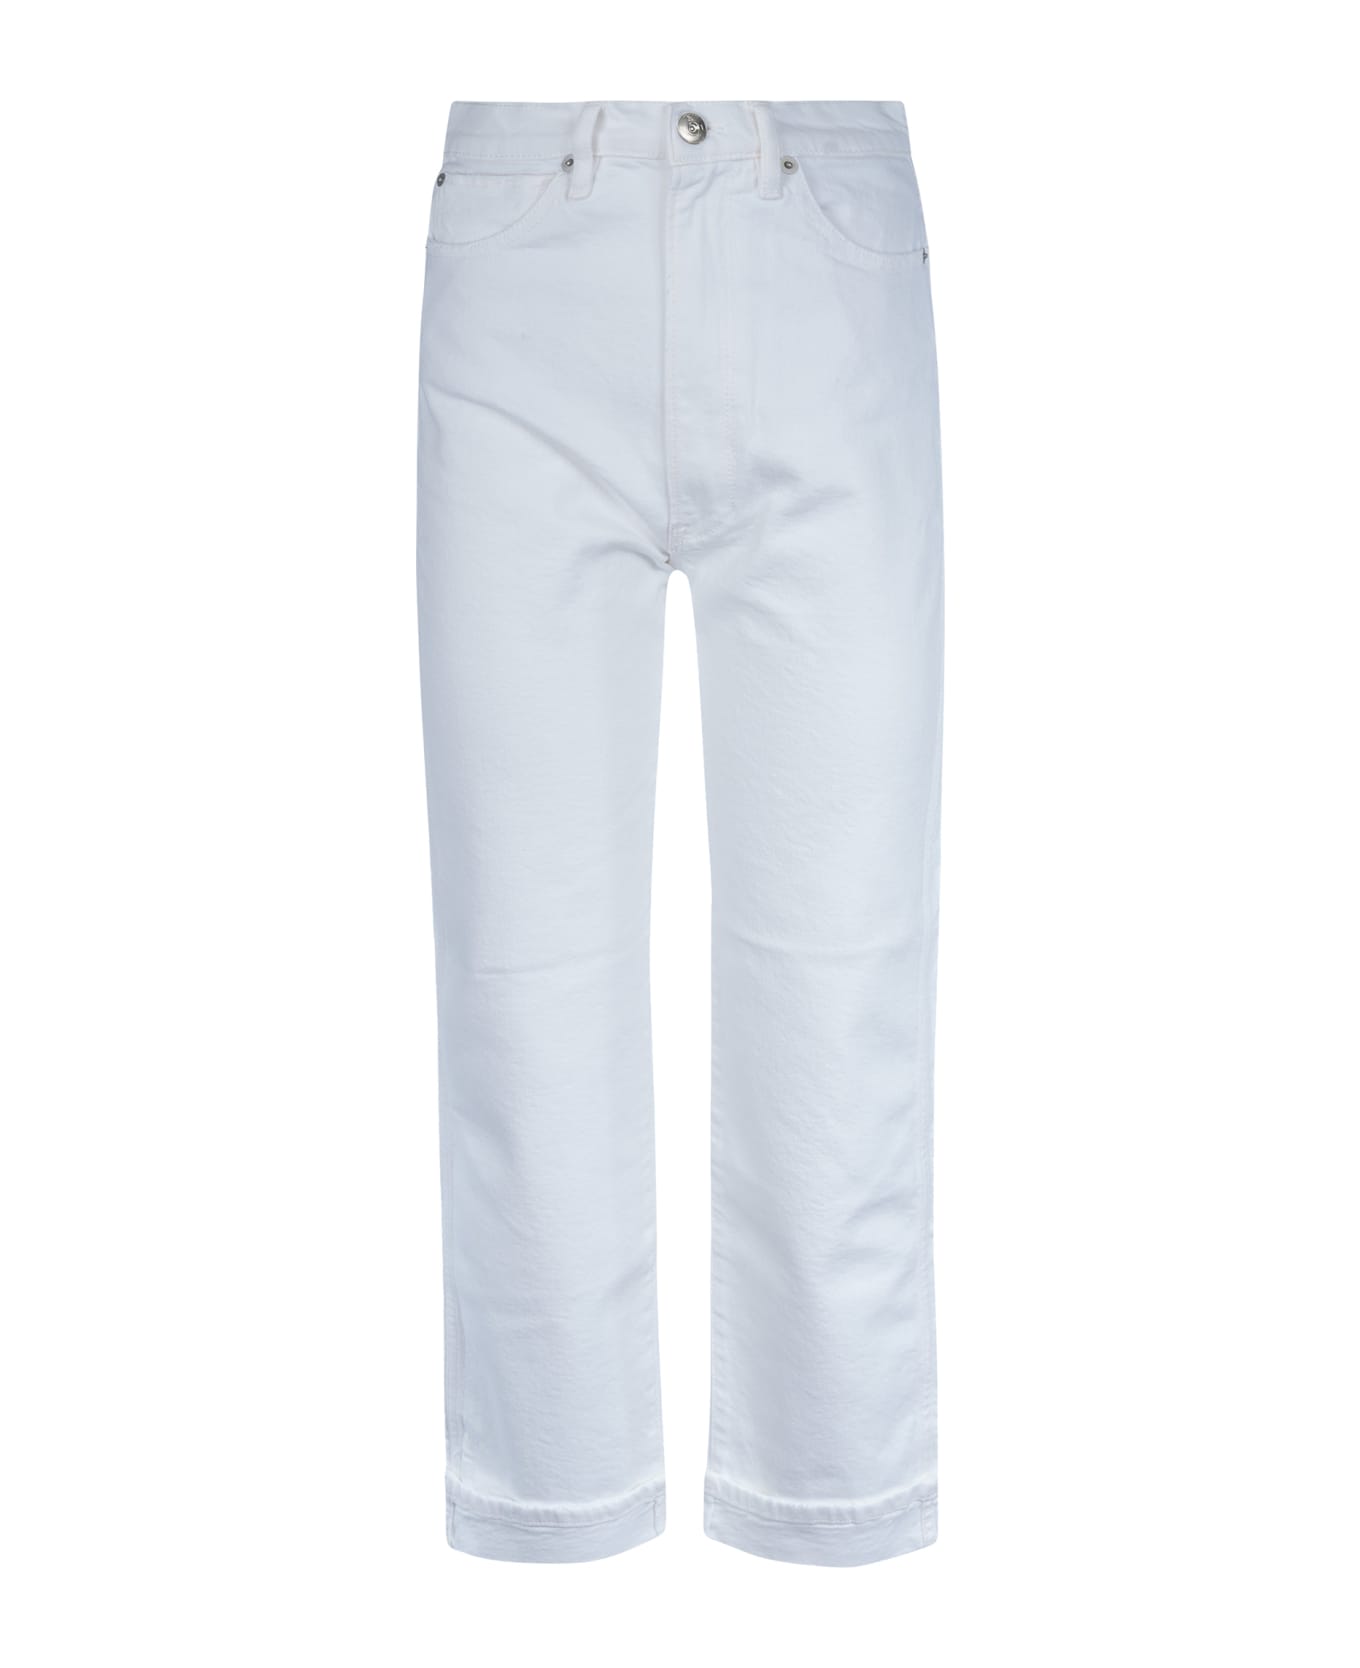 3x1 Buttoned Straight Jeans - Optic White